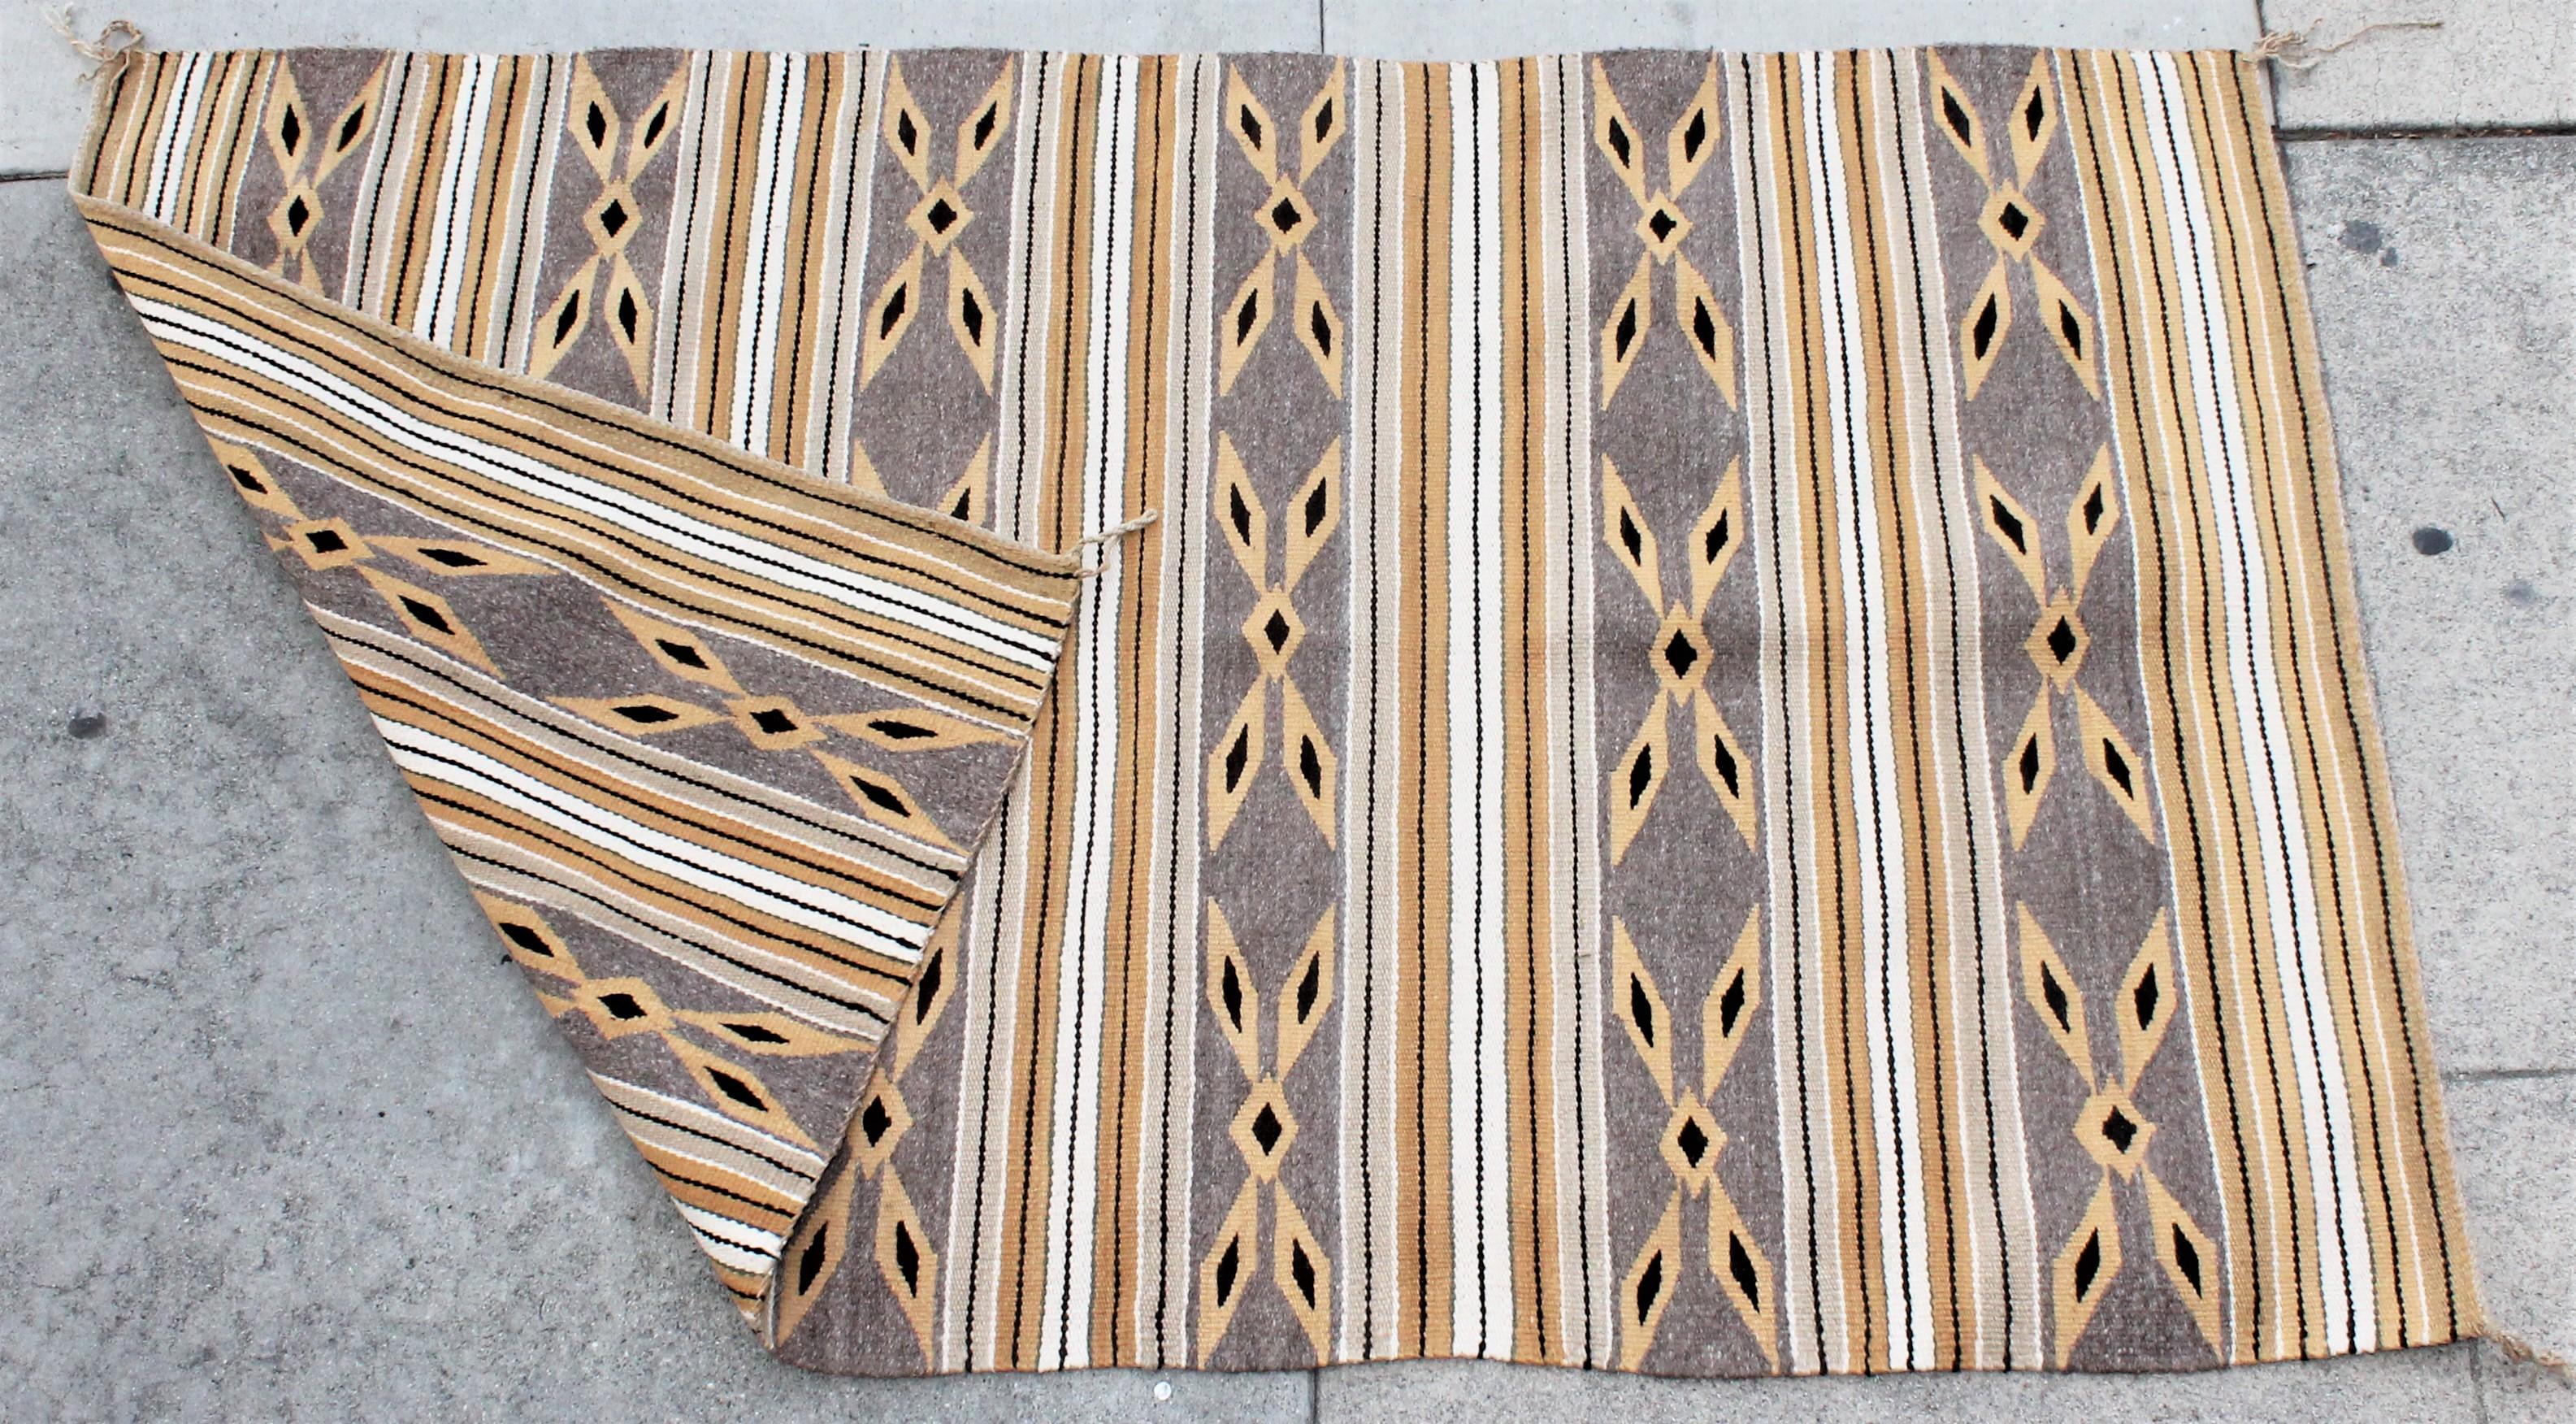 This fine golden rod and grey simple geometric weaving is in fine condition.